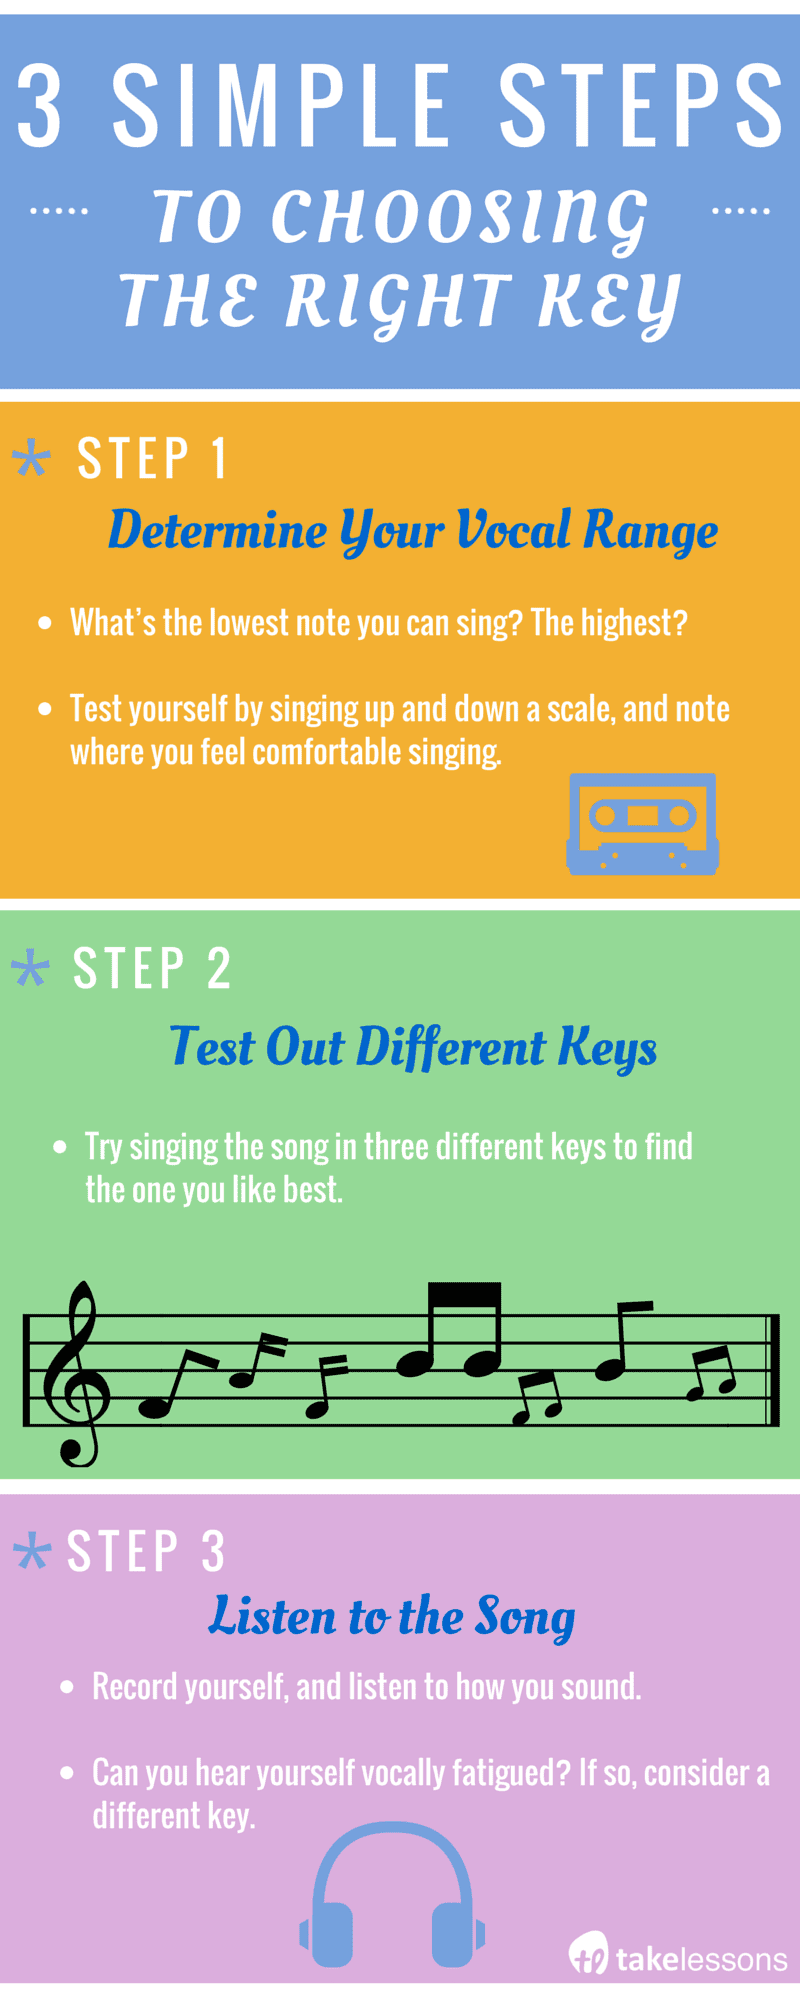 Determine your vocal range, test out different keys, and listen to the song to find the right key. 